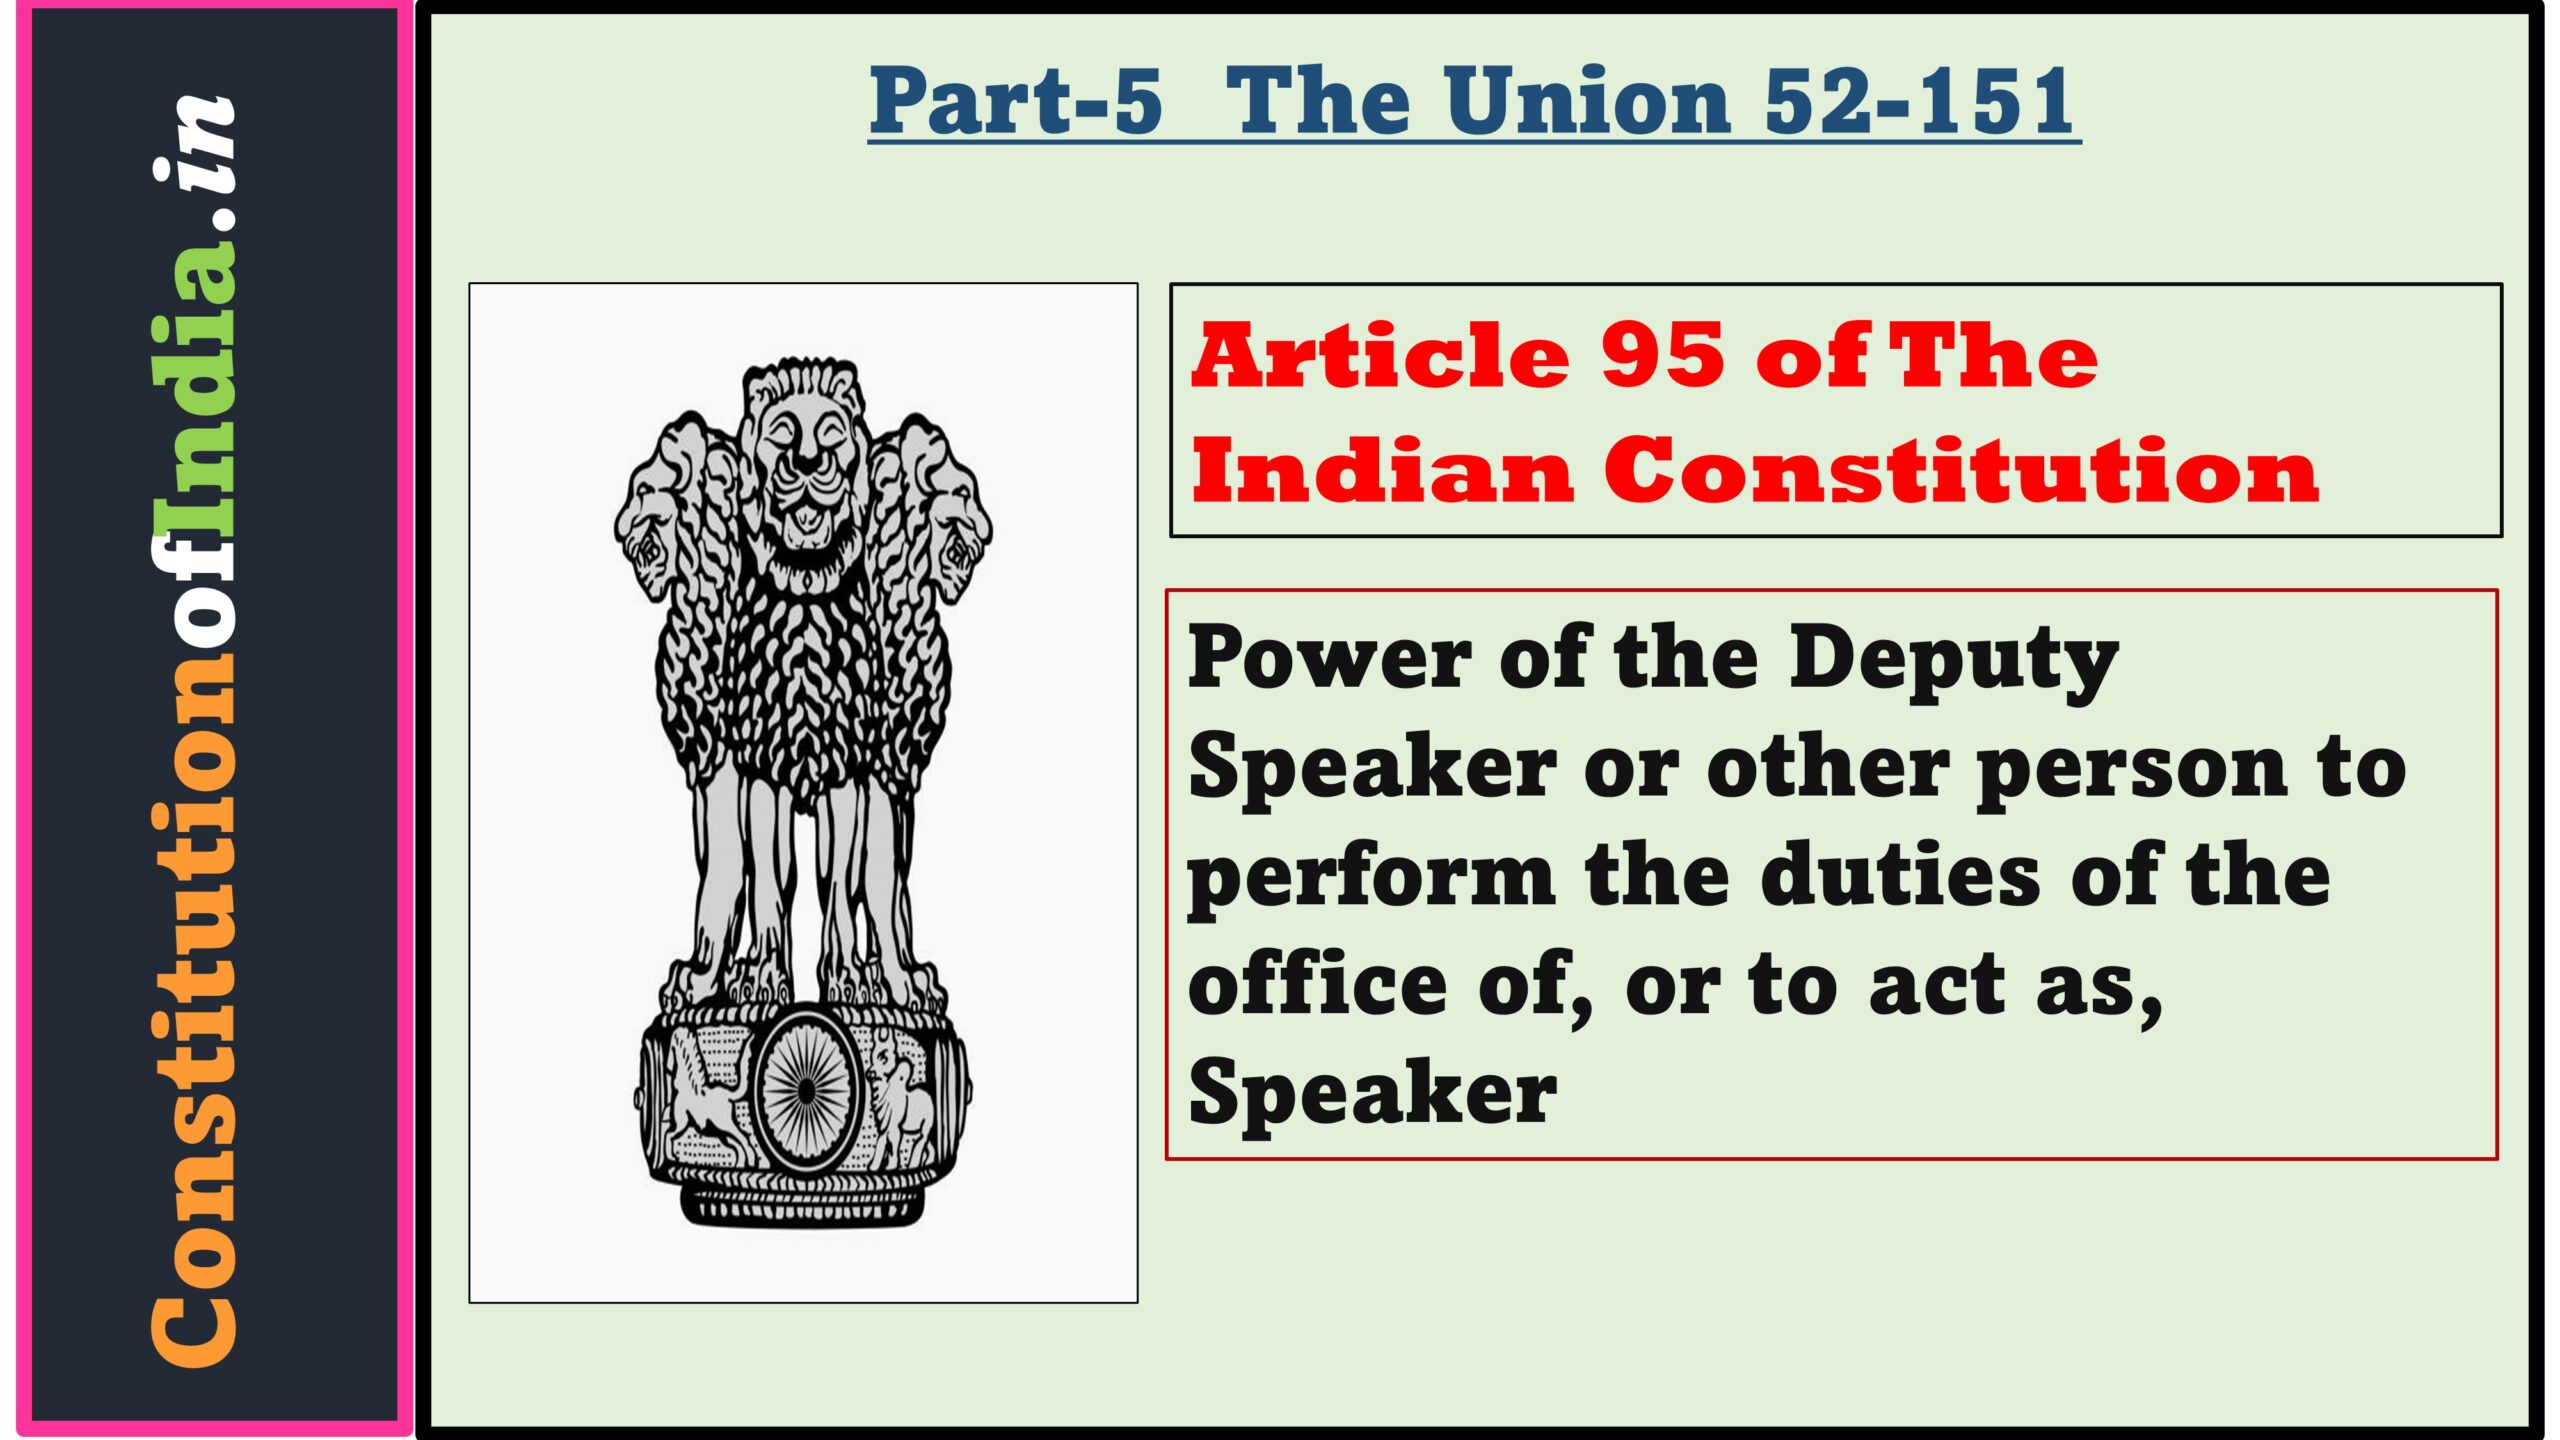 Article 95 of The Indian Constitution